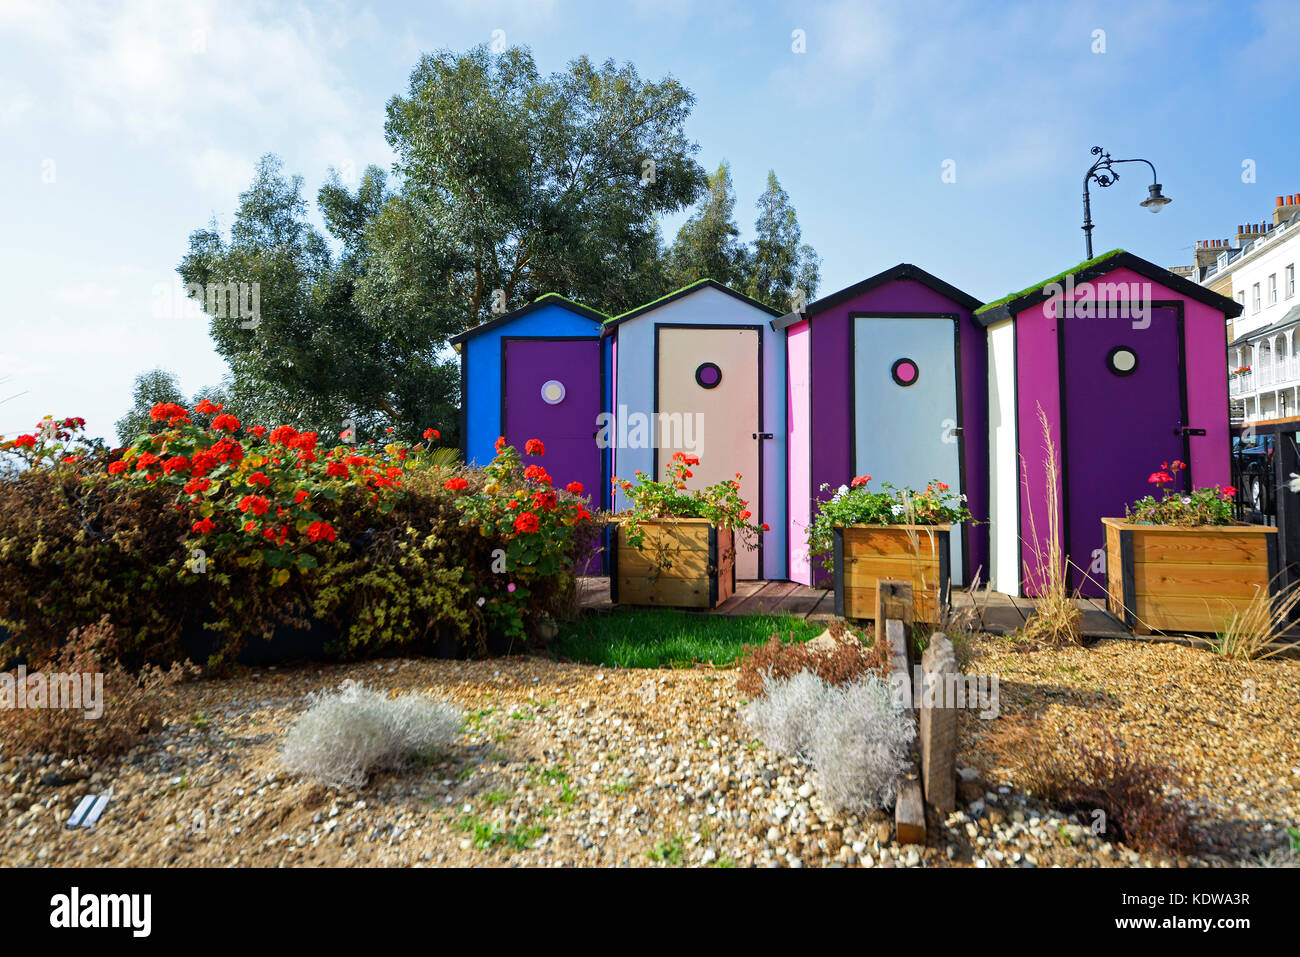 Southend Young Offenders Hampton Court Palace Flower Show exhibit on display in Southend on Sea, Essex. Beach huts Stock Photo